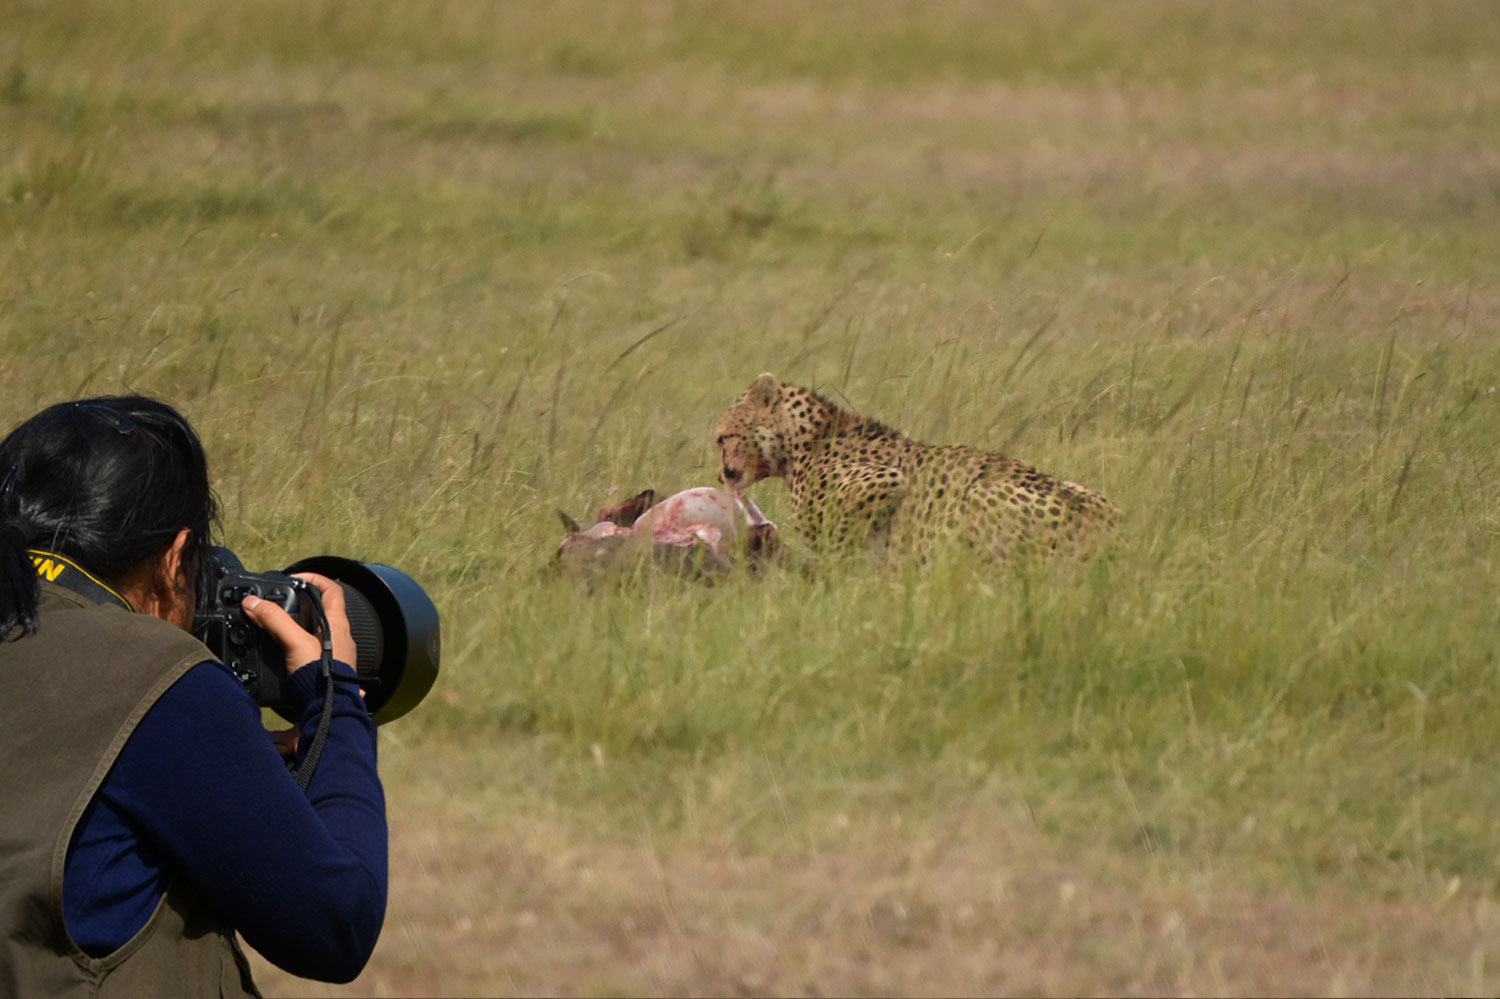 The wild land Masai Mara brings out the wildlife photographer within you